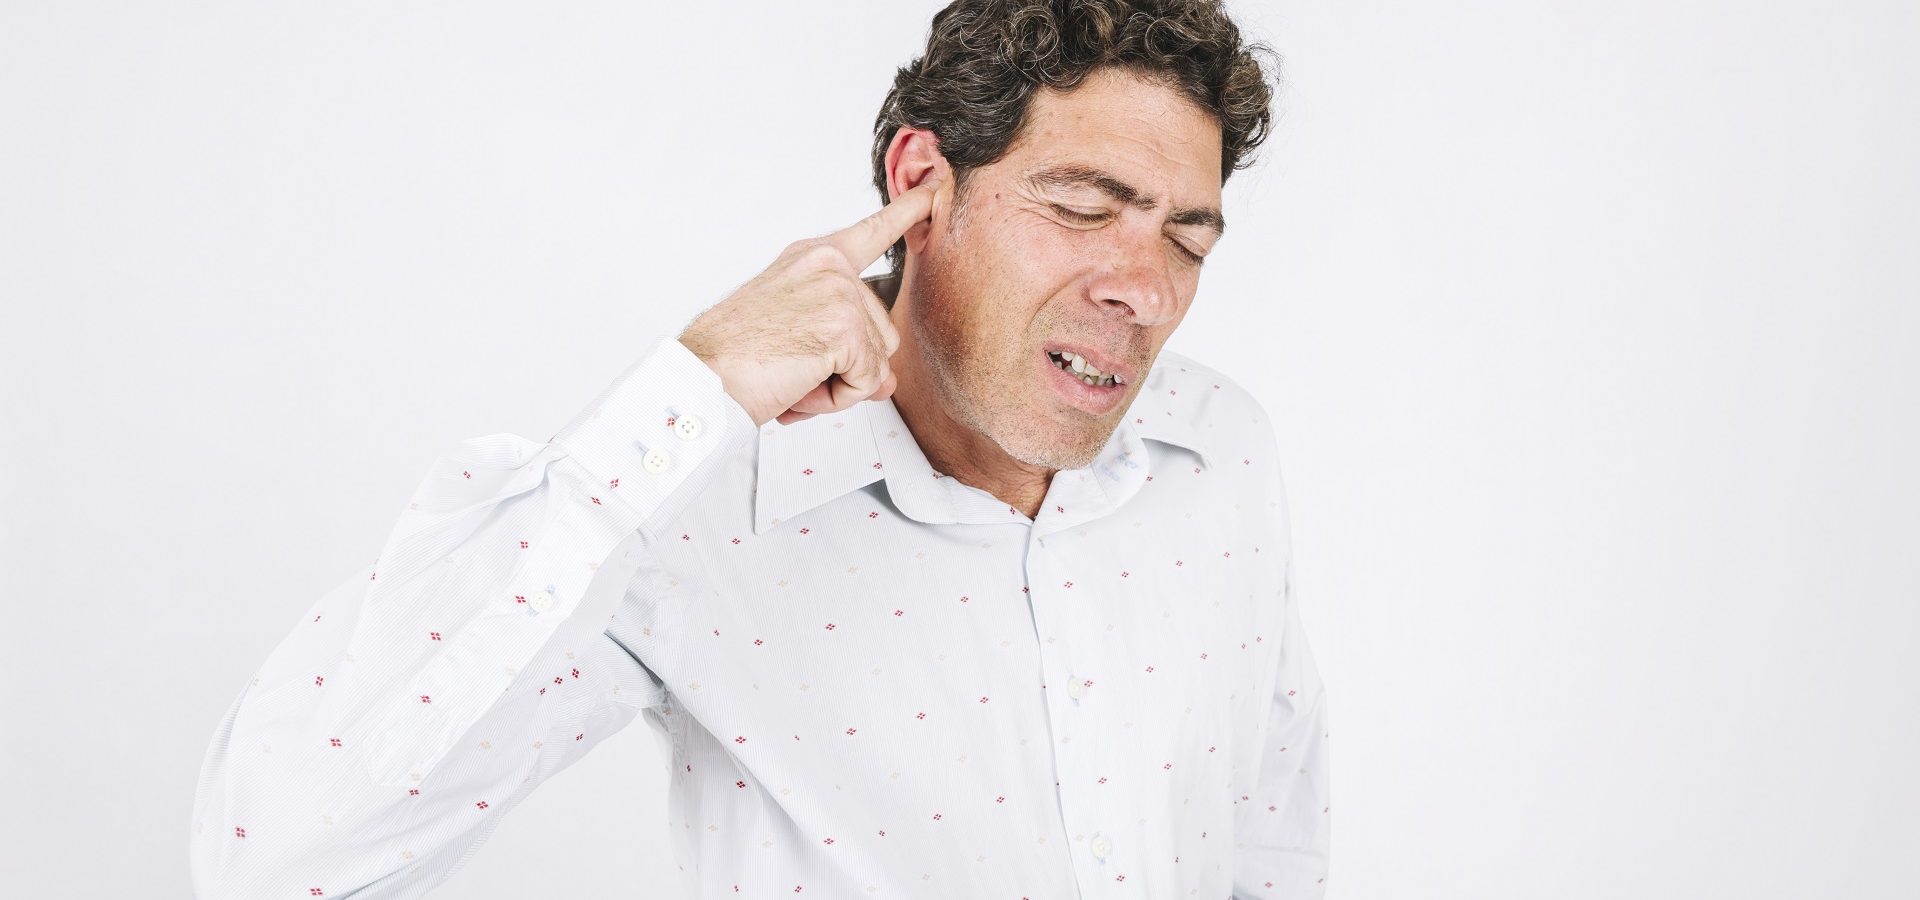 Man with hearing loss suffering from hearing recruitment